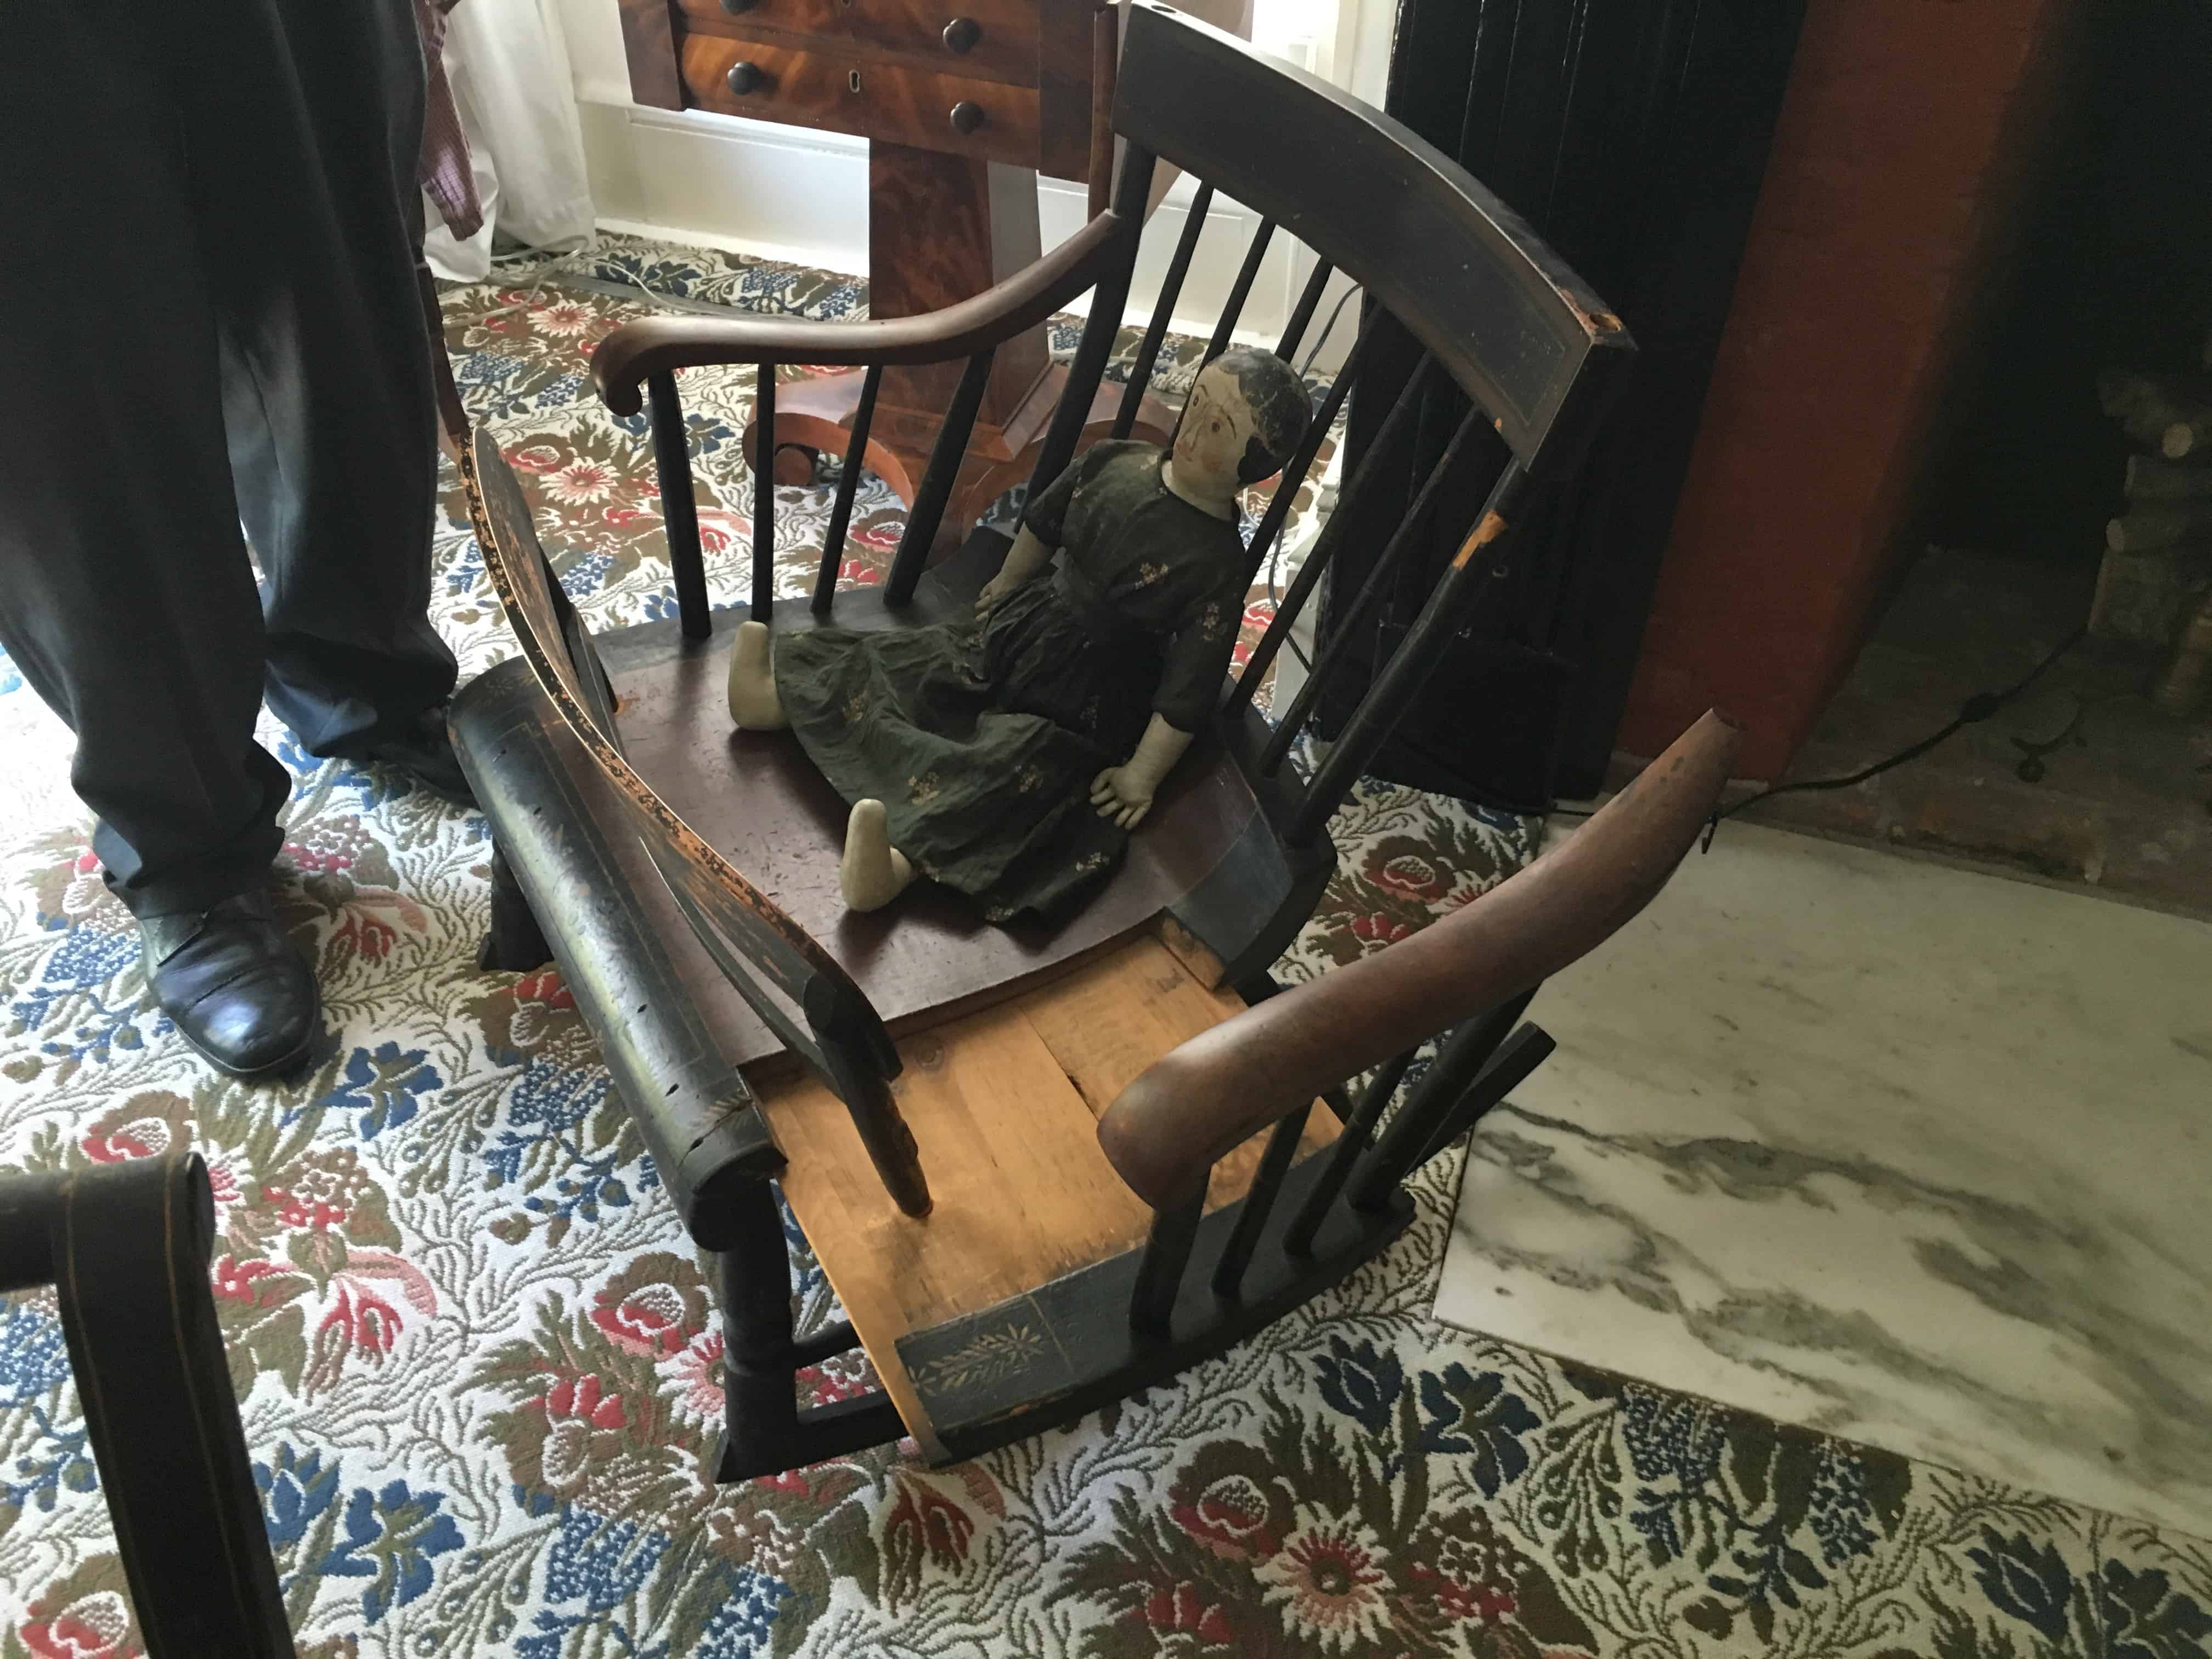 Rocking chair / cradle at the Henry B. Clarke House in Chicago, Illinois